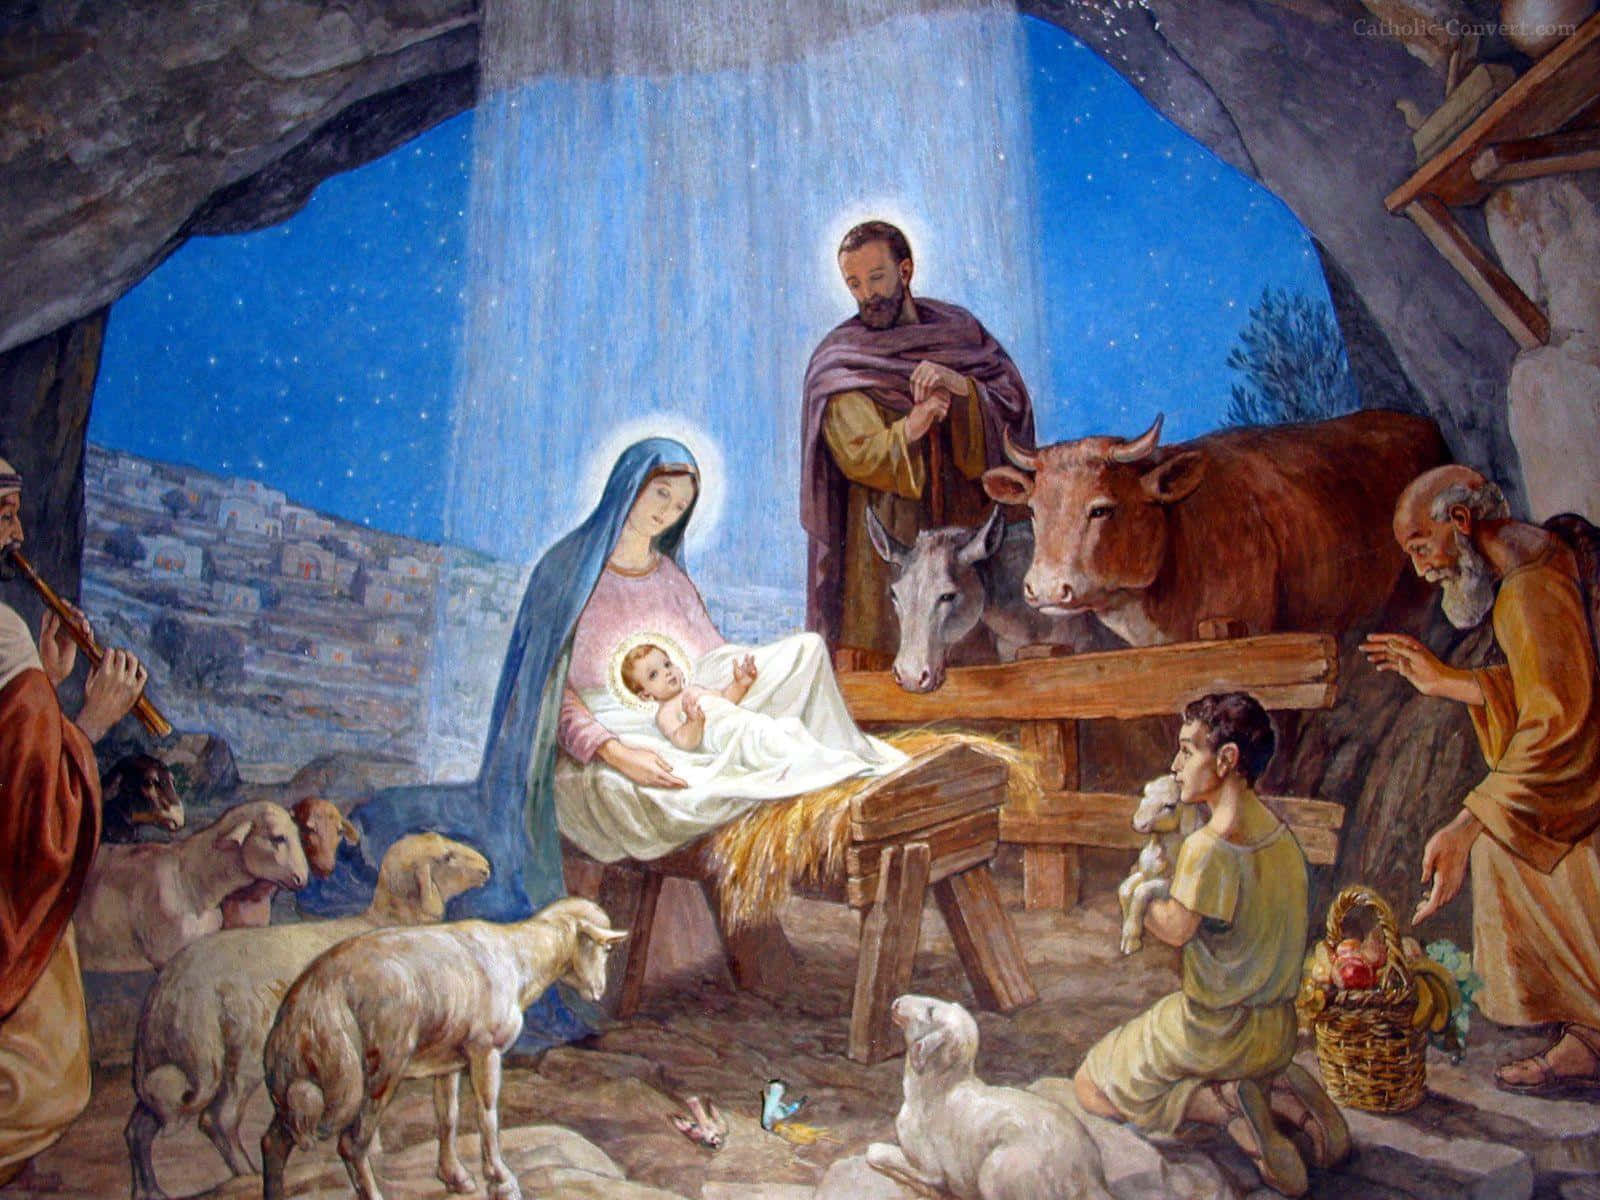 Celebrate the Nativity of Jesus with this beautiful reminder of the birth of our Savior.